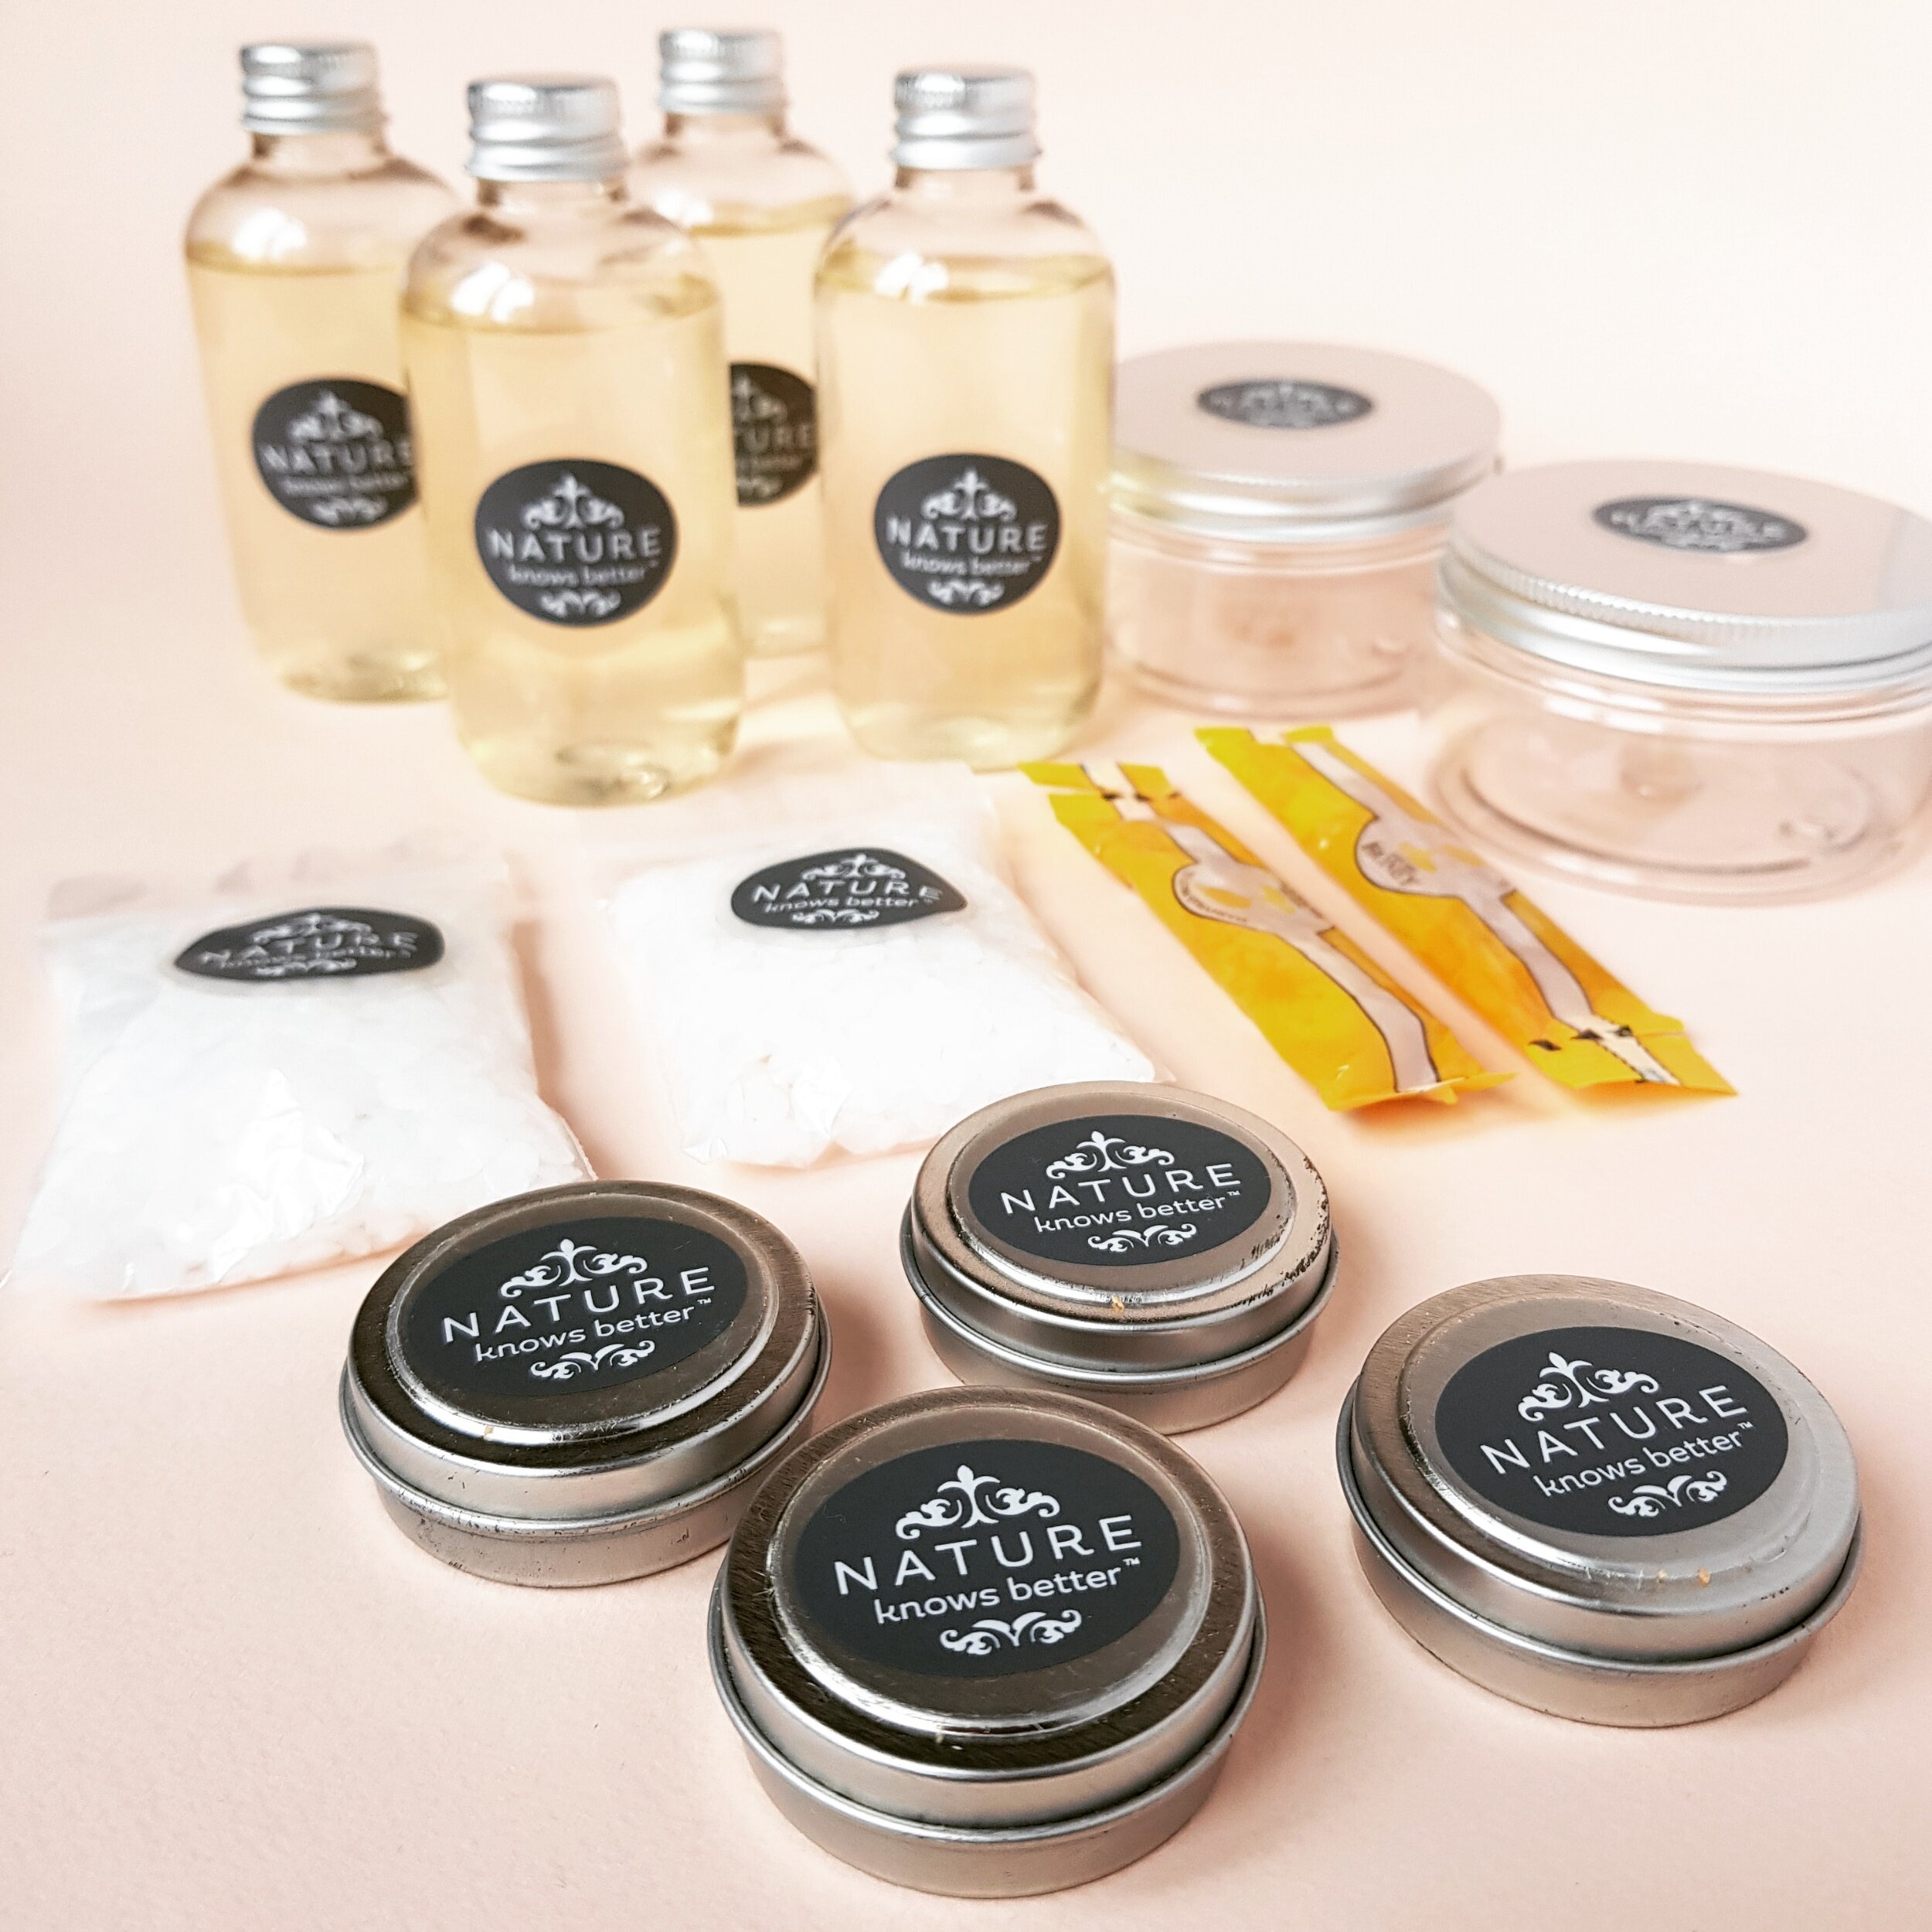 DIY Kits - Make Your Own Natural Skin Care - Easy to Make